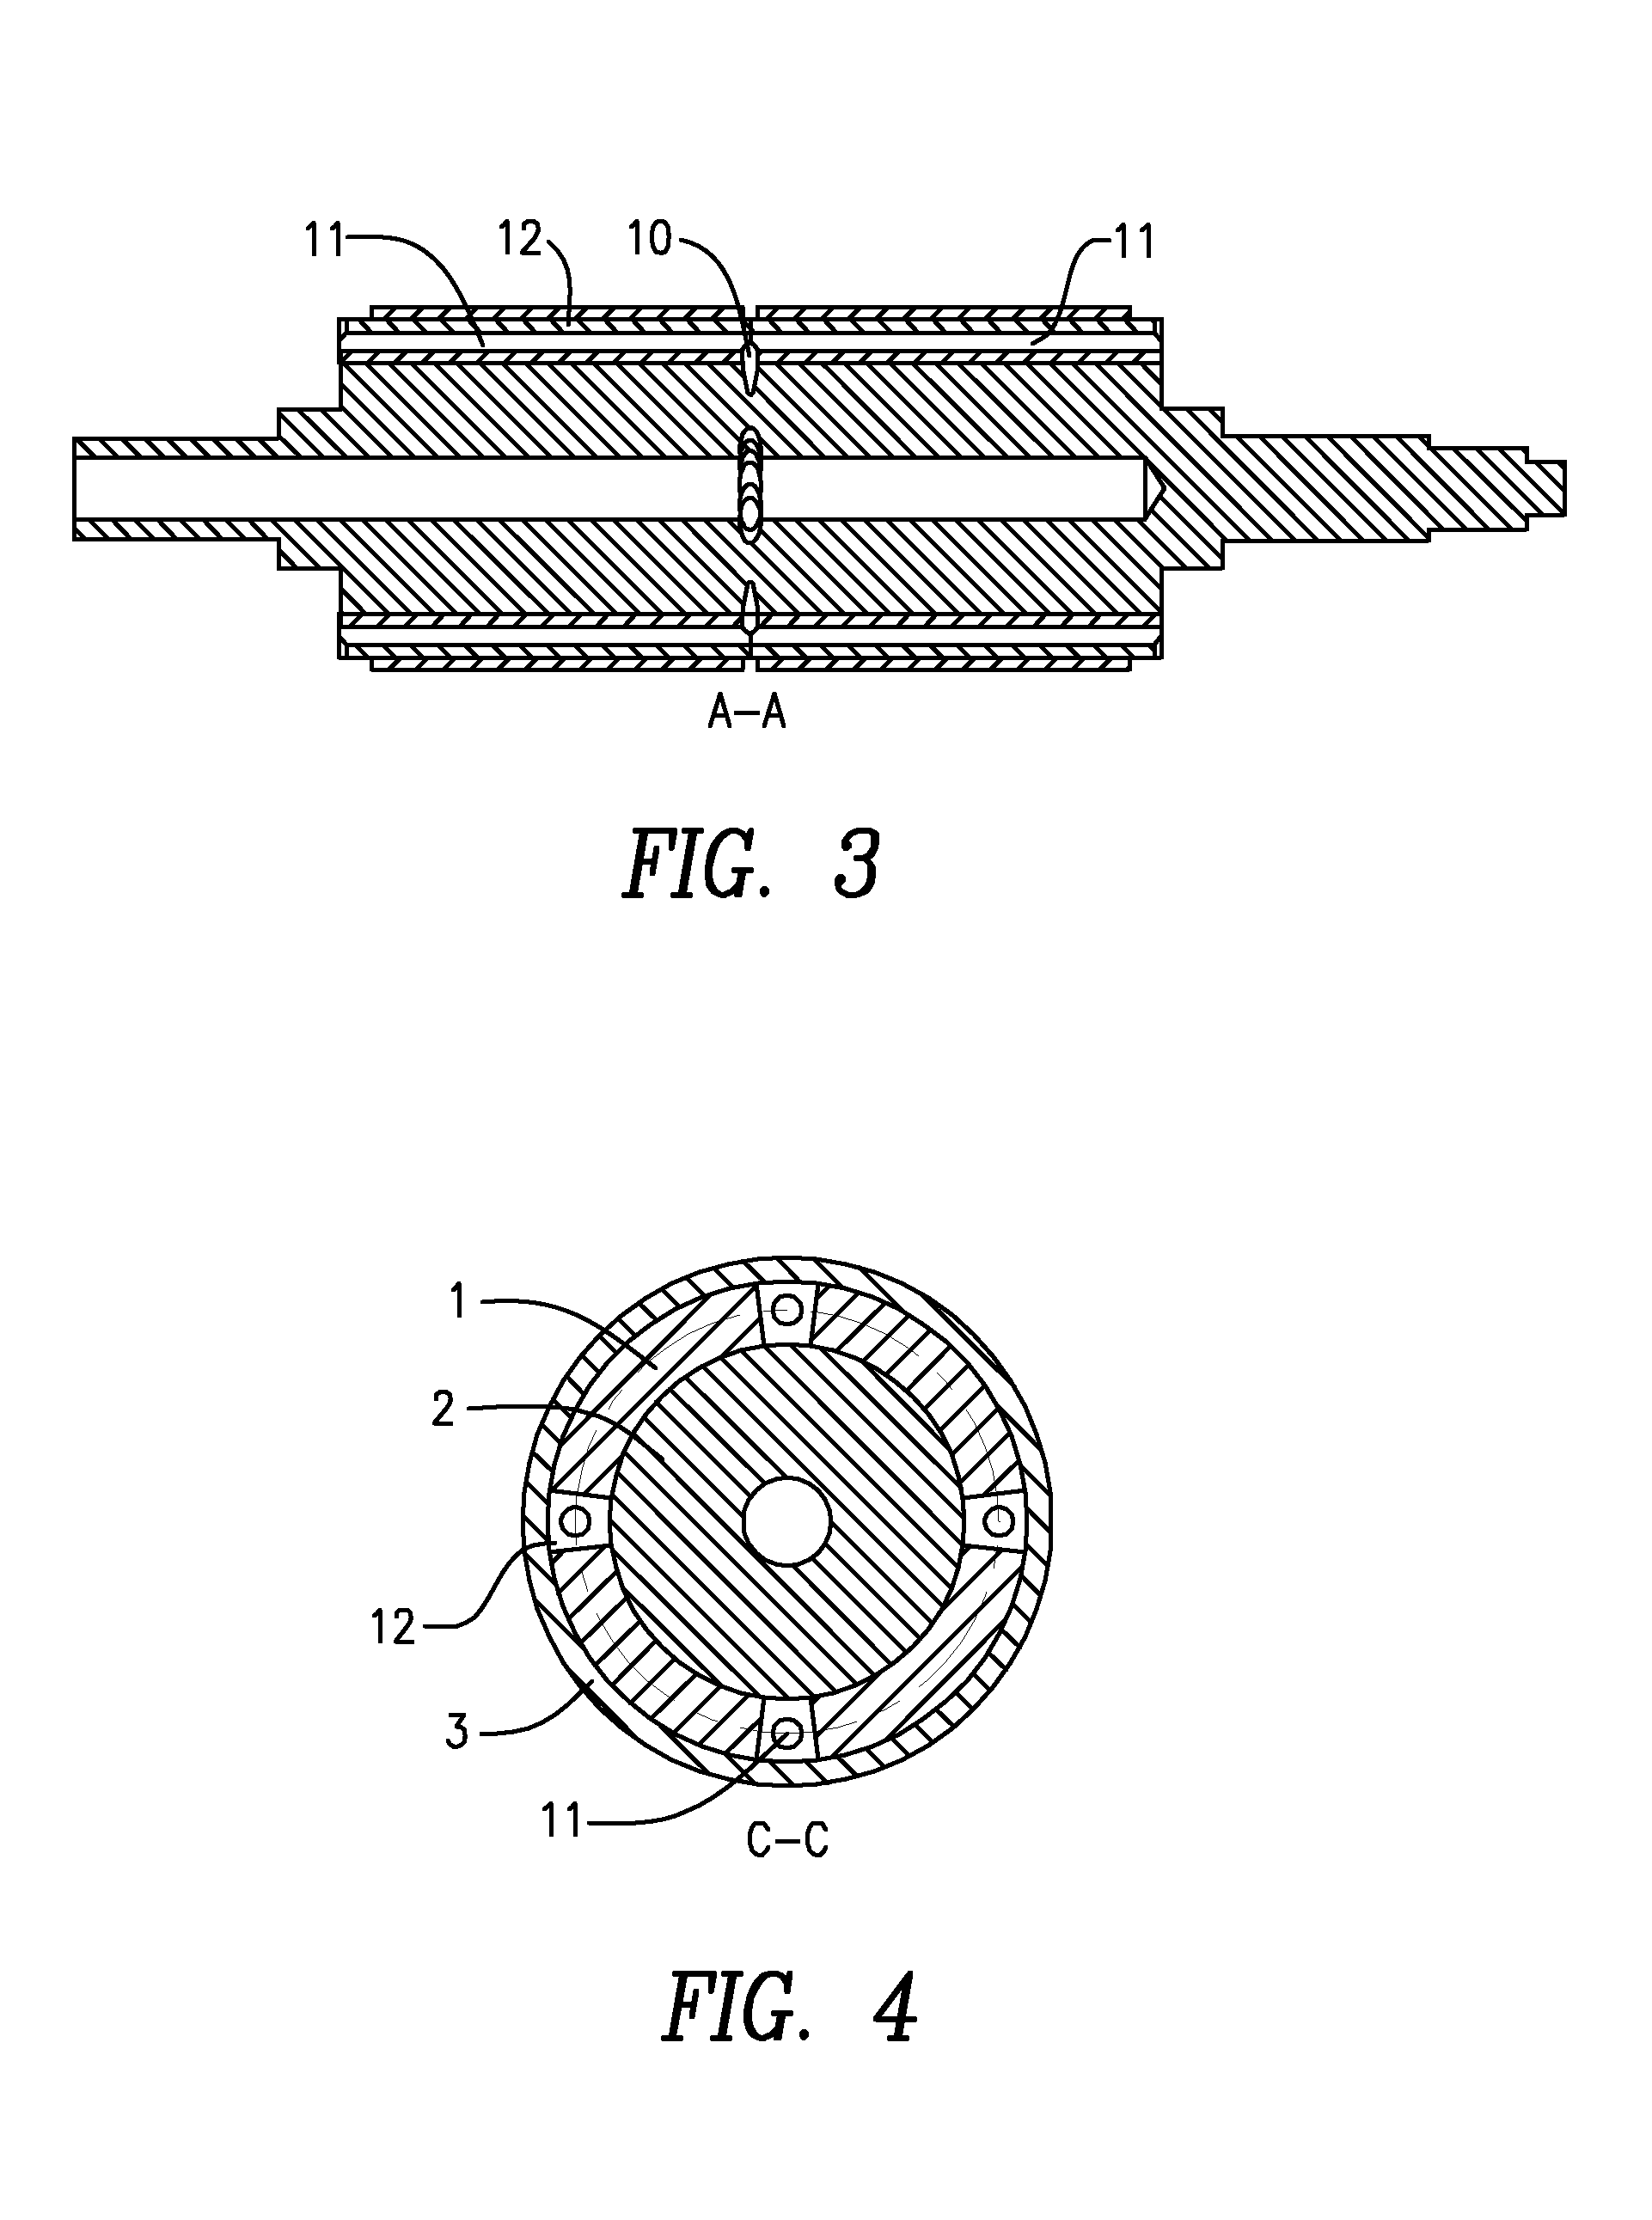 Self-cooled rotor for an electrical machine